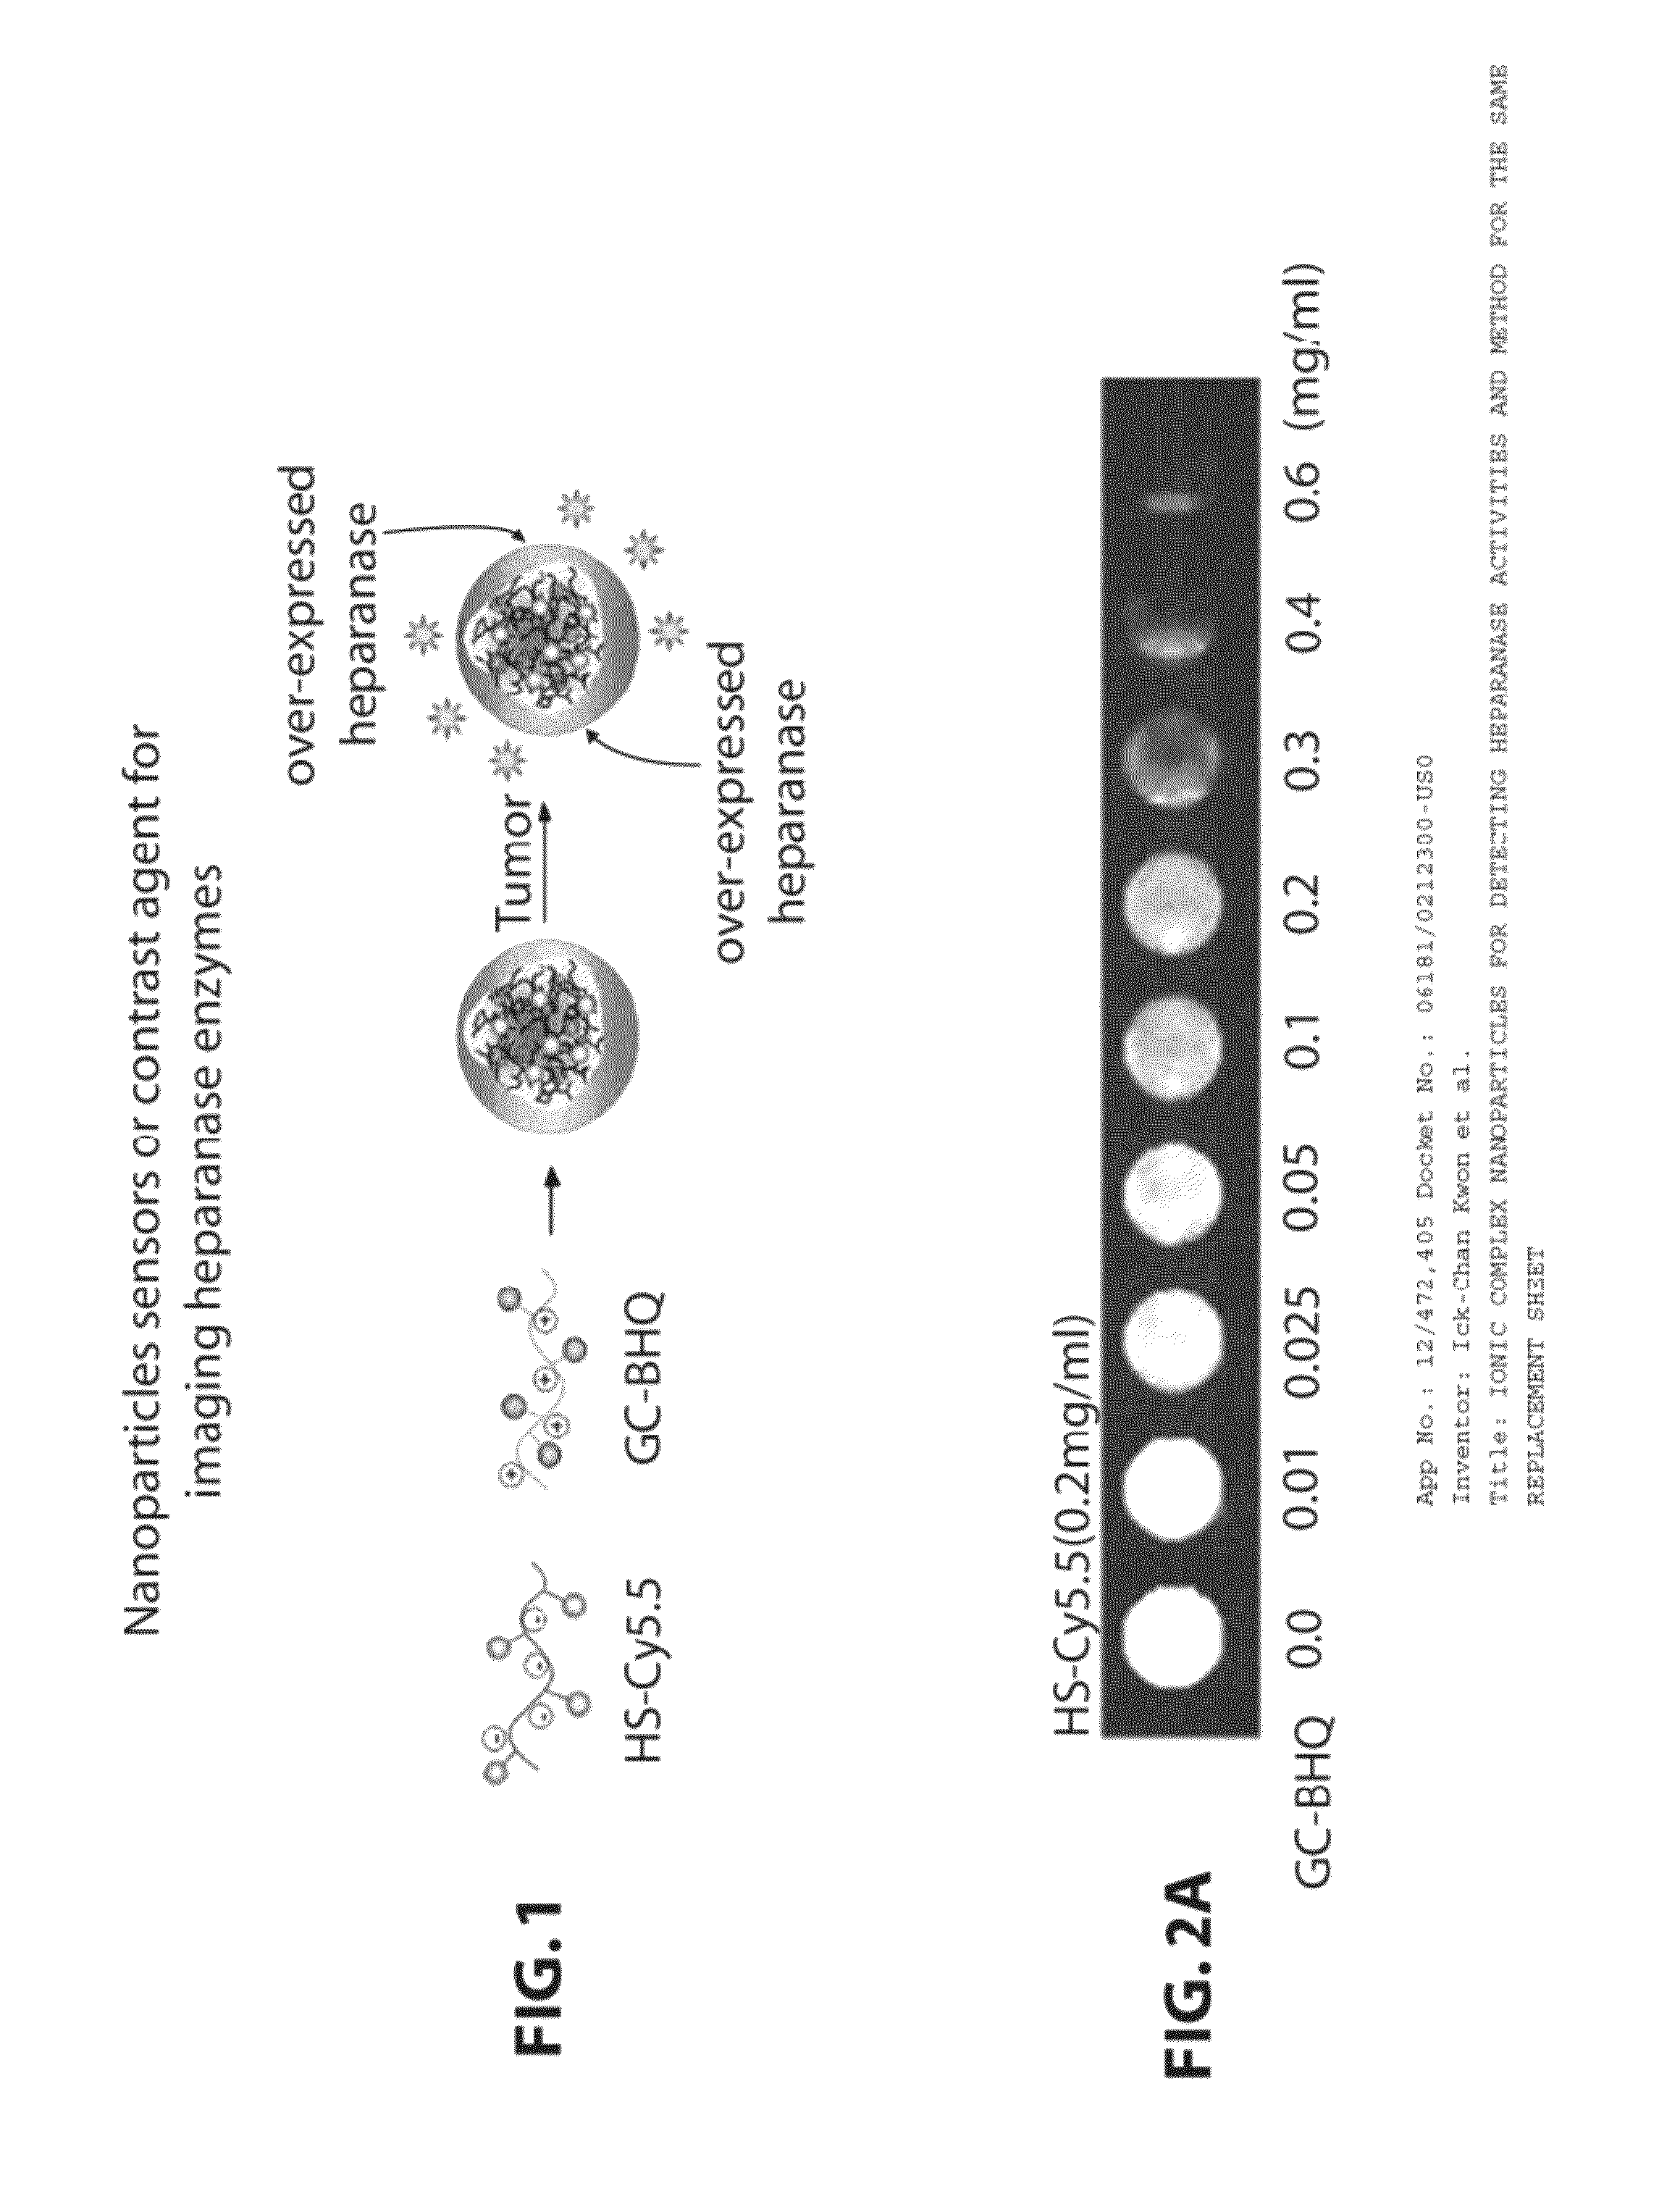 Ionic complex nanoparticles for detecting heparanase activities and method for preparing the same